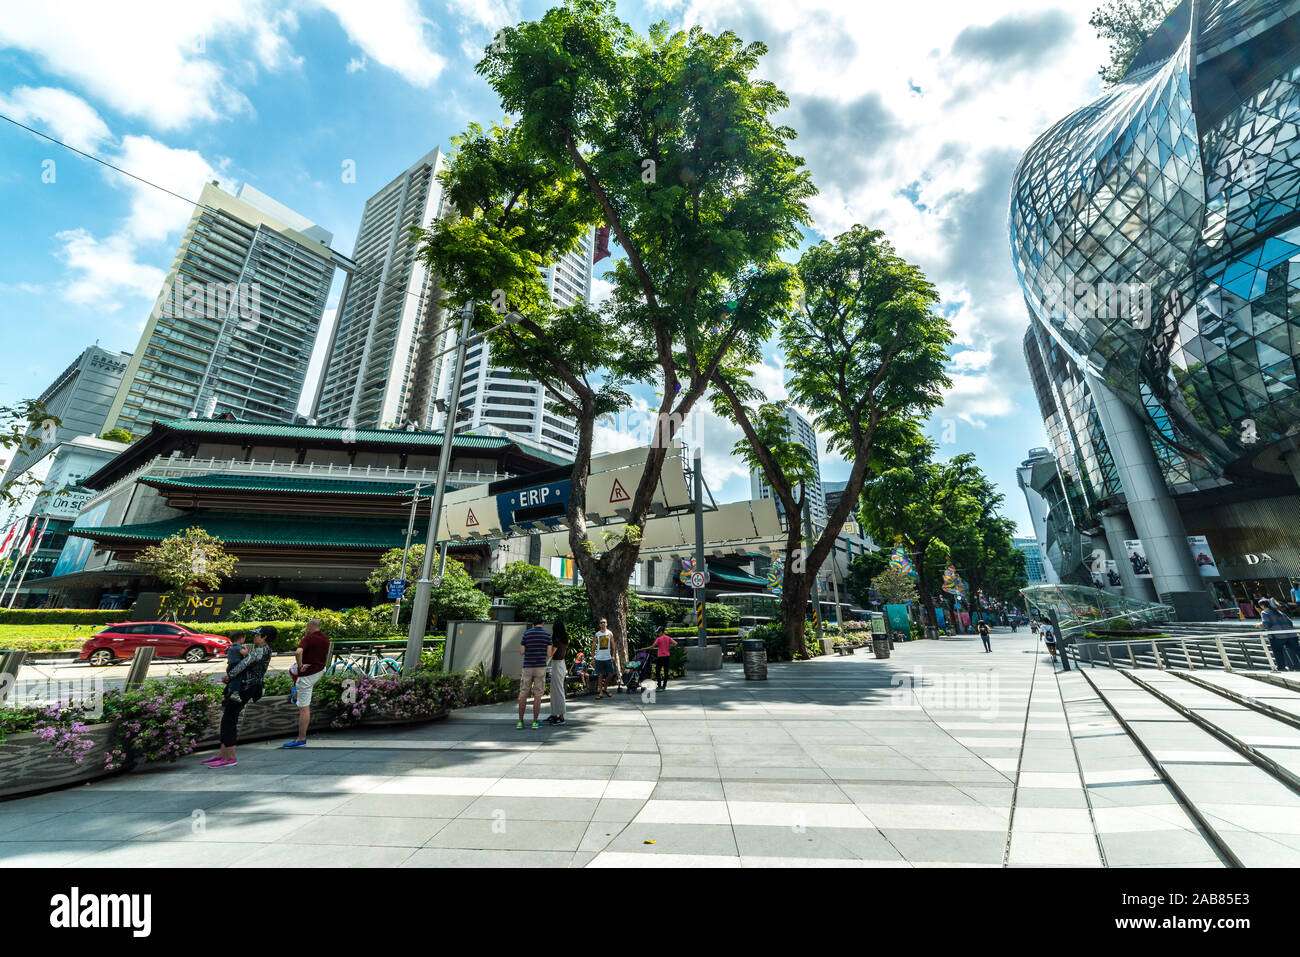 Deserted Orchard Road highlights Singapore's economic woes - Nikkei Asia